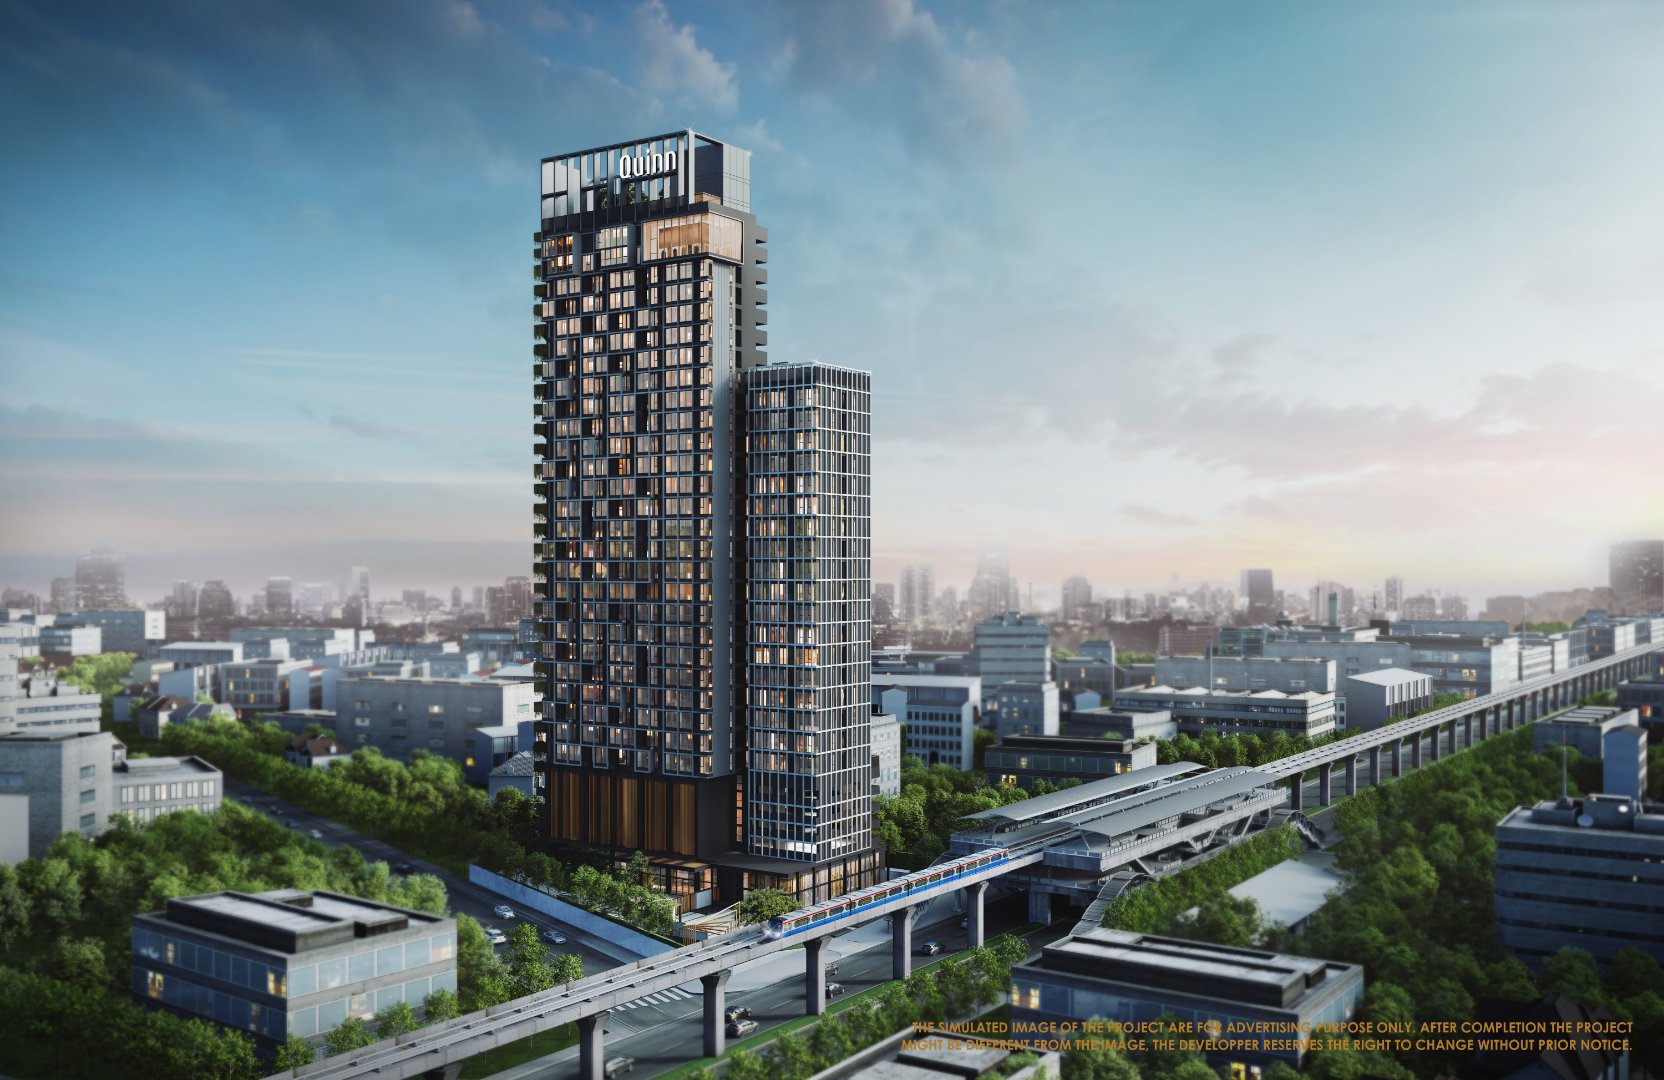 Quinn Sukhumvit 101 by MBK Real Estate. Next to Punnawithi BTS. MBK Real Estate, an associate company of MBK, better known for the shopping malls, is the developer for this new condo launch in Bangkok.